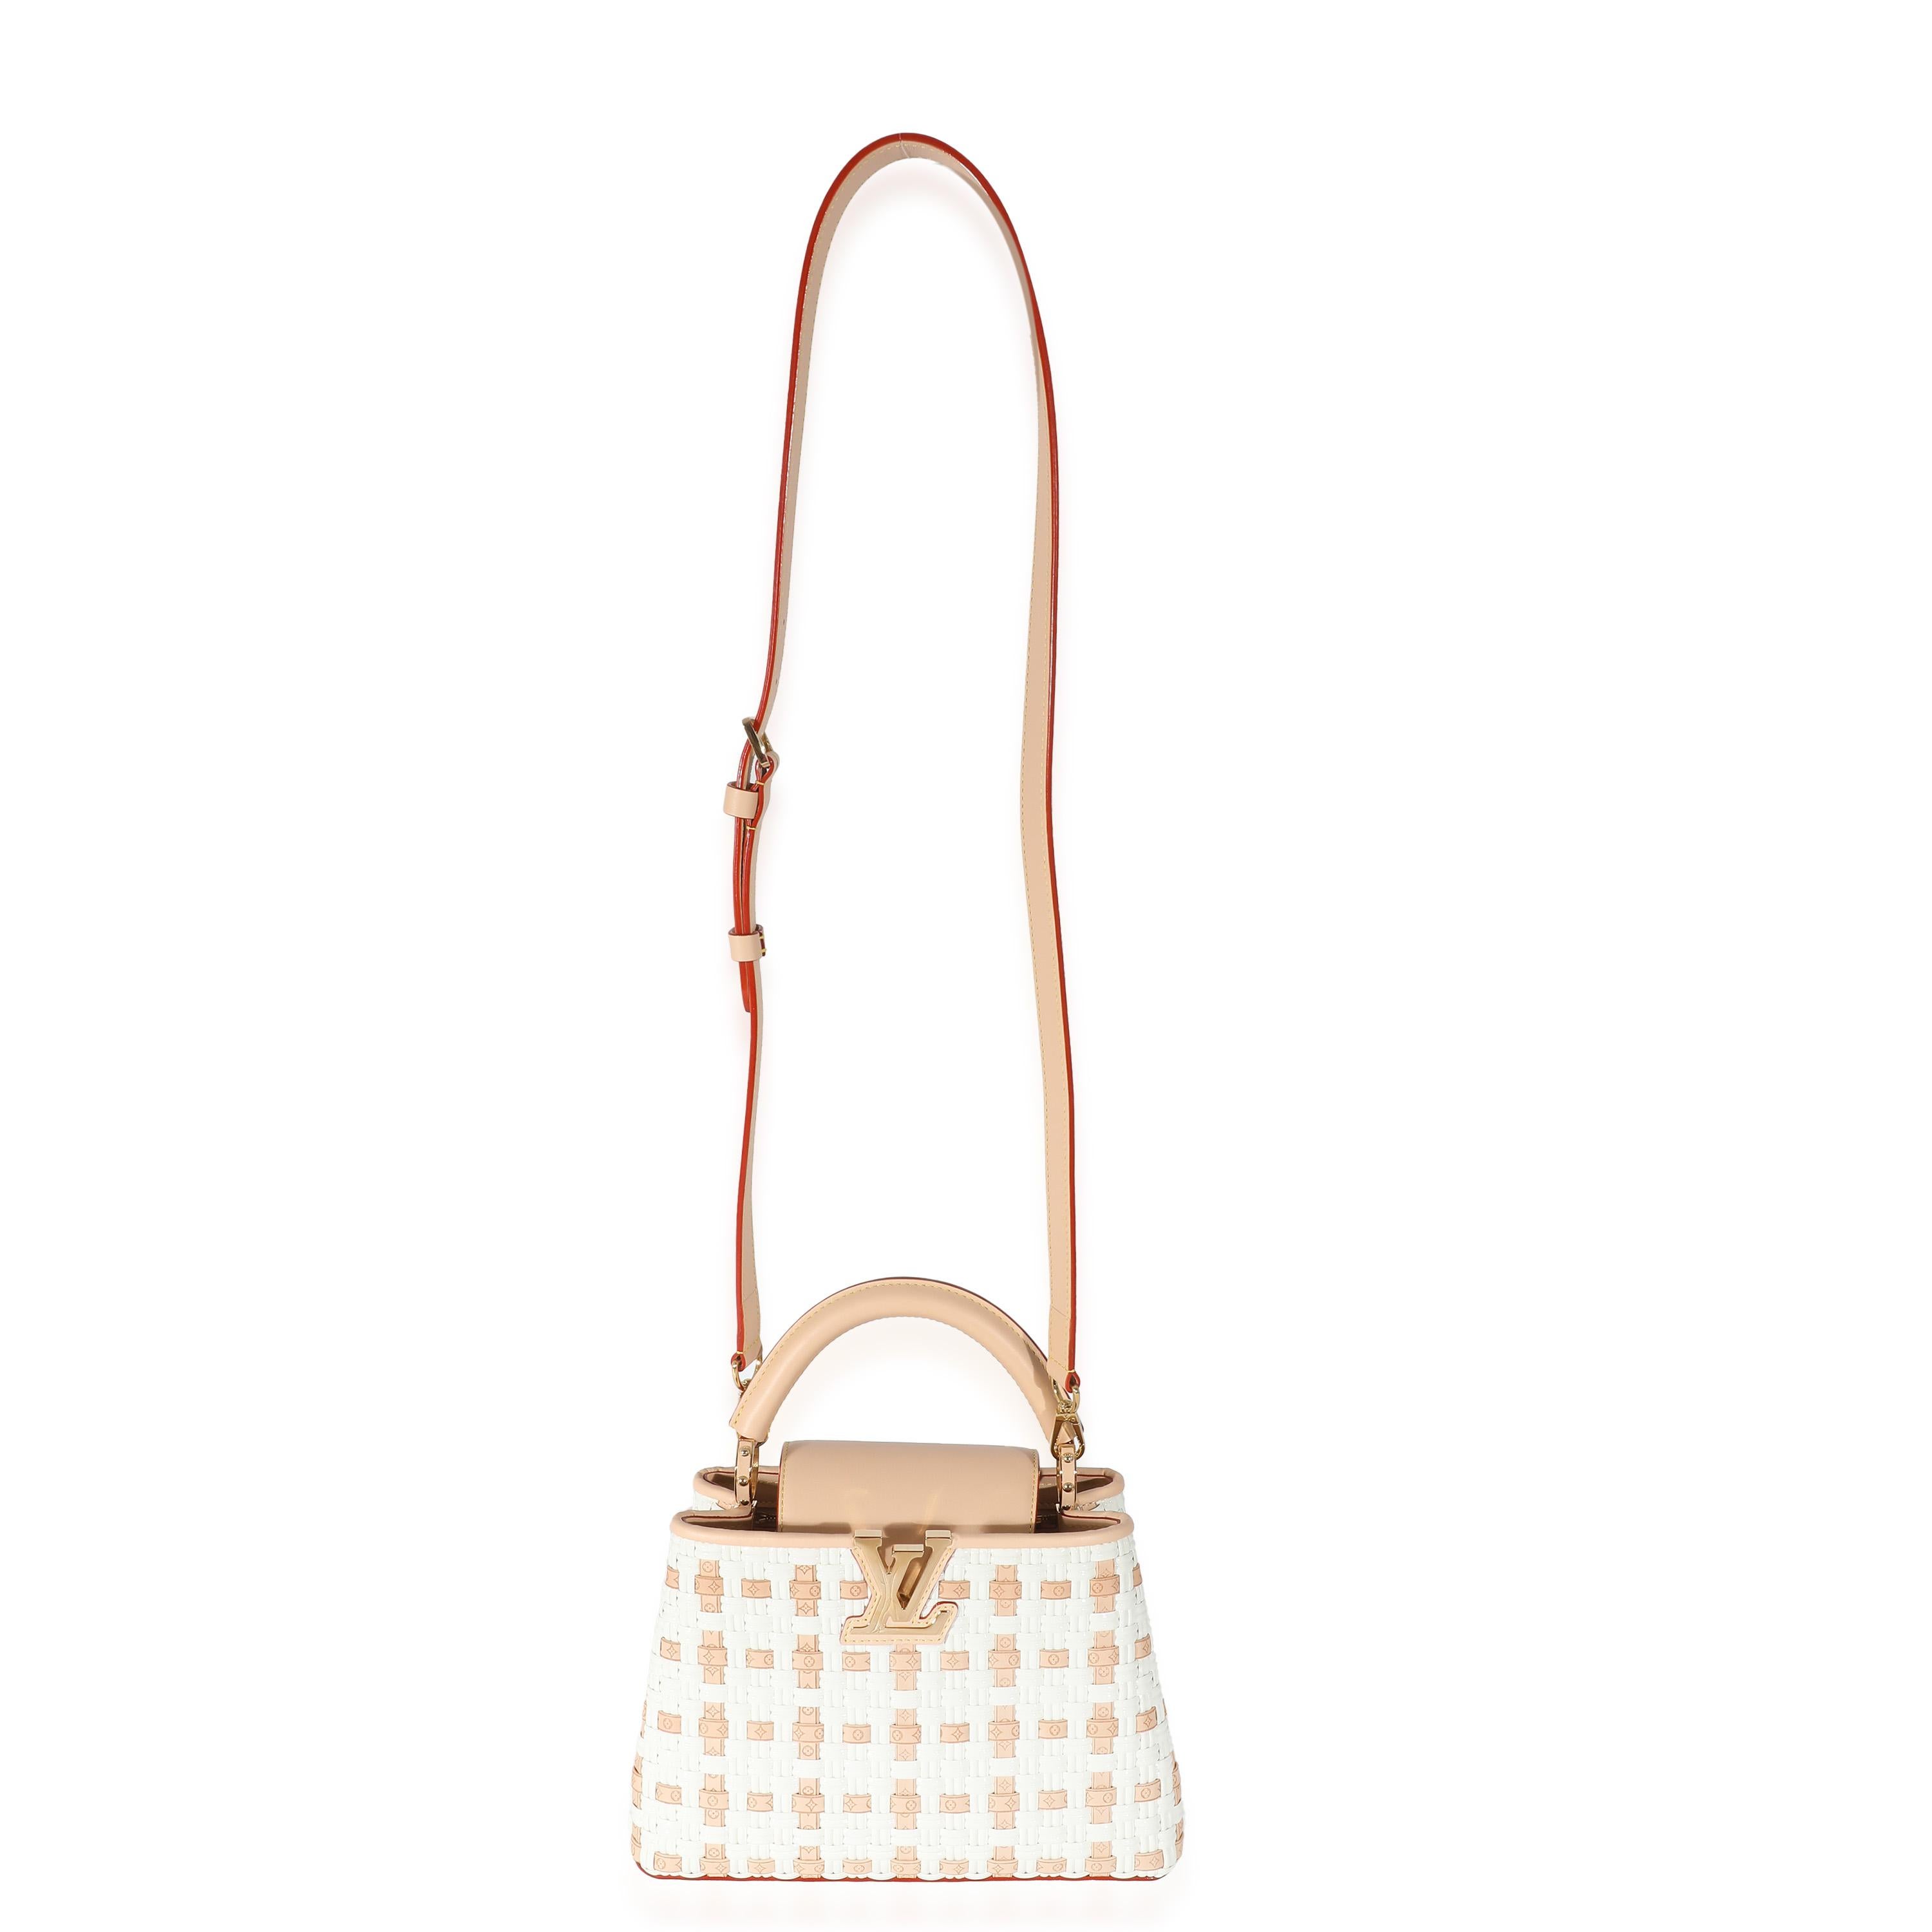 Listing Title: Louis Vuitton White Monogram Wicker Woven LV Heavenly Capucines BB
SKU: 135542
MSRP: 7300.00 USD
Condition: Pre-owned 
Handbag Condition: Excellent
Condition Comments: Item is in excellent condition and displays light signs of wear.